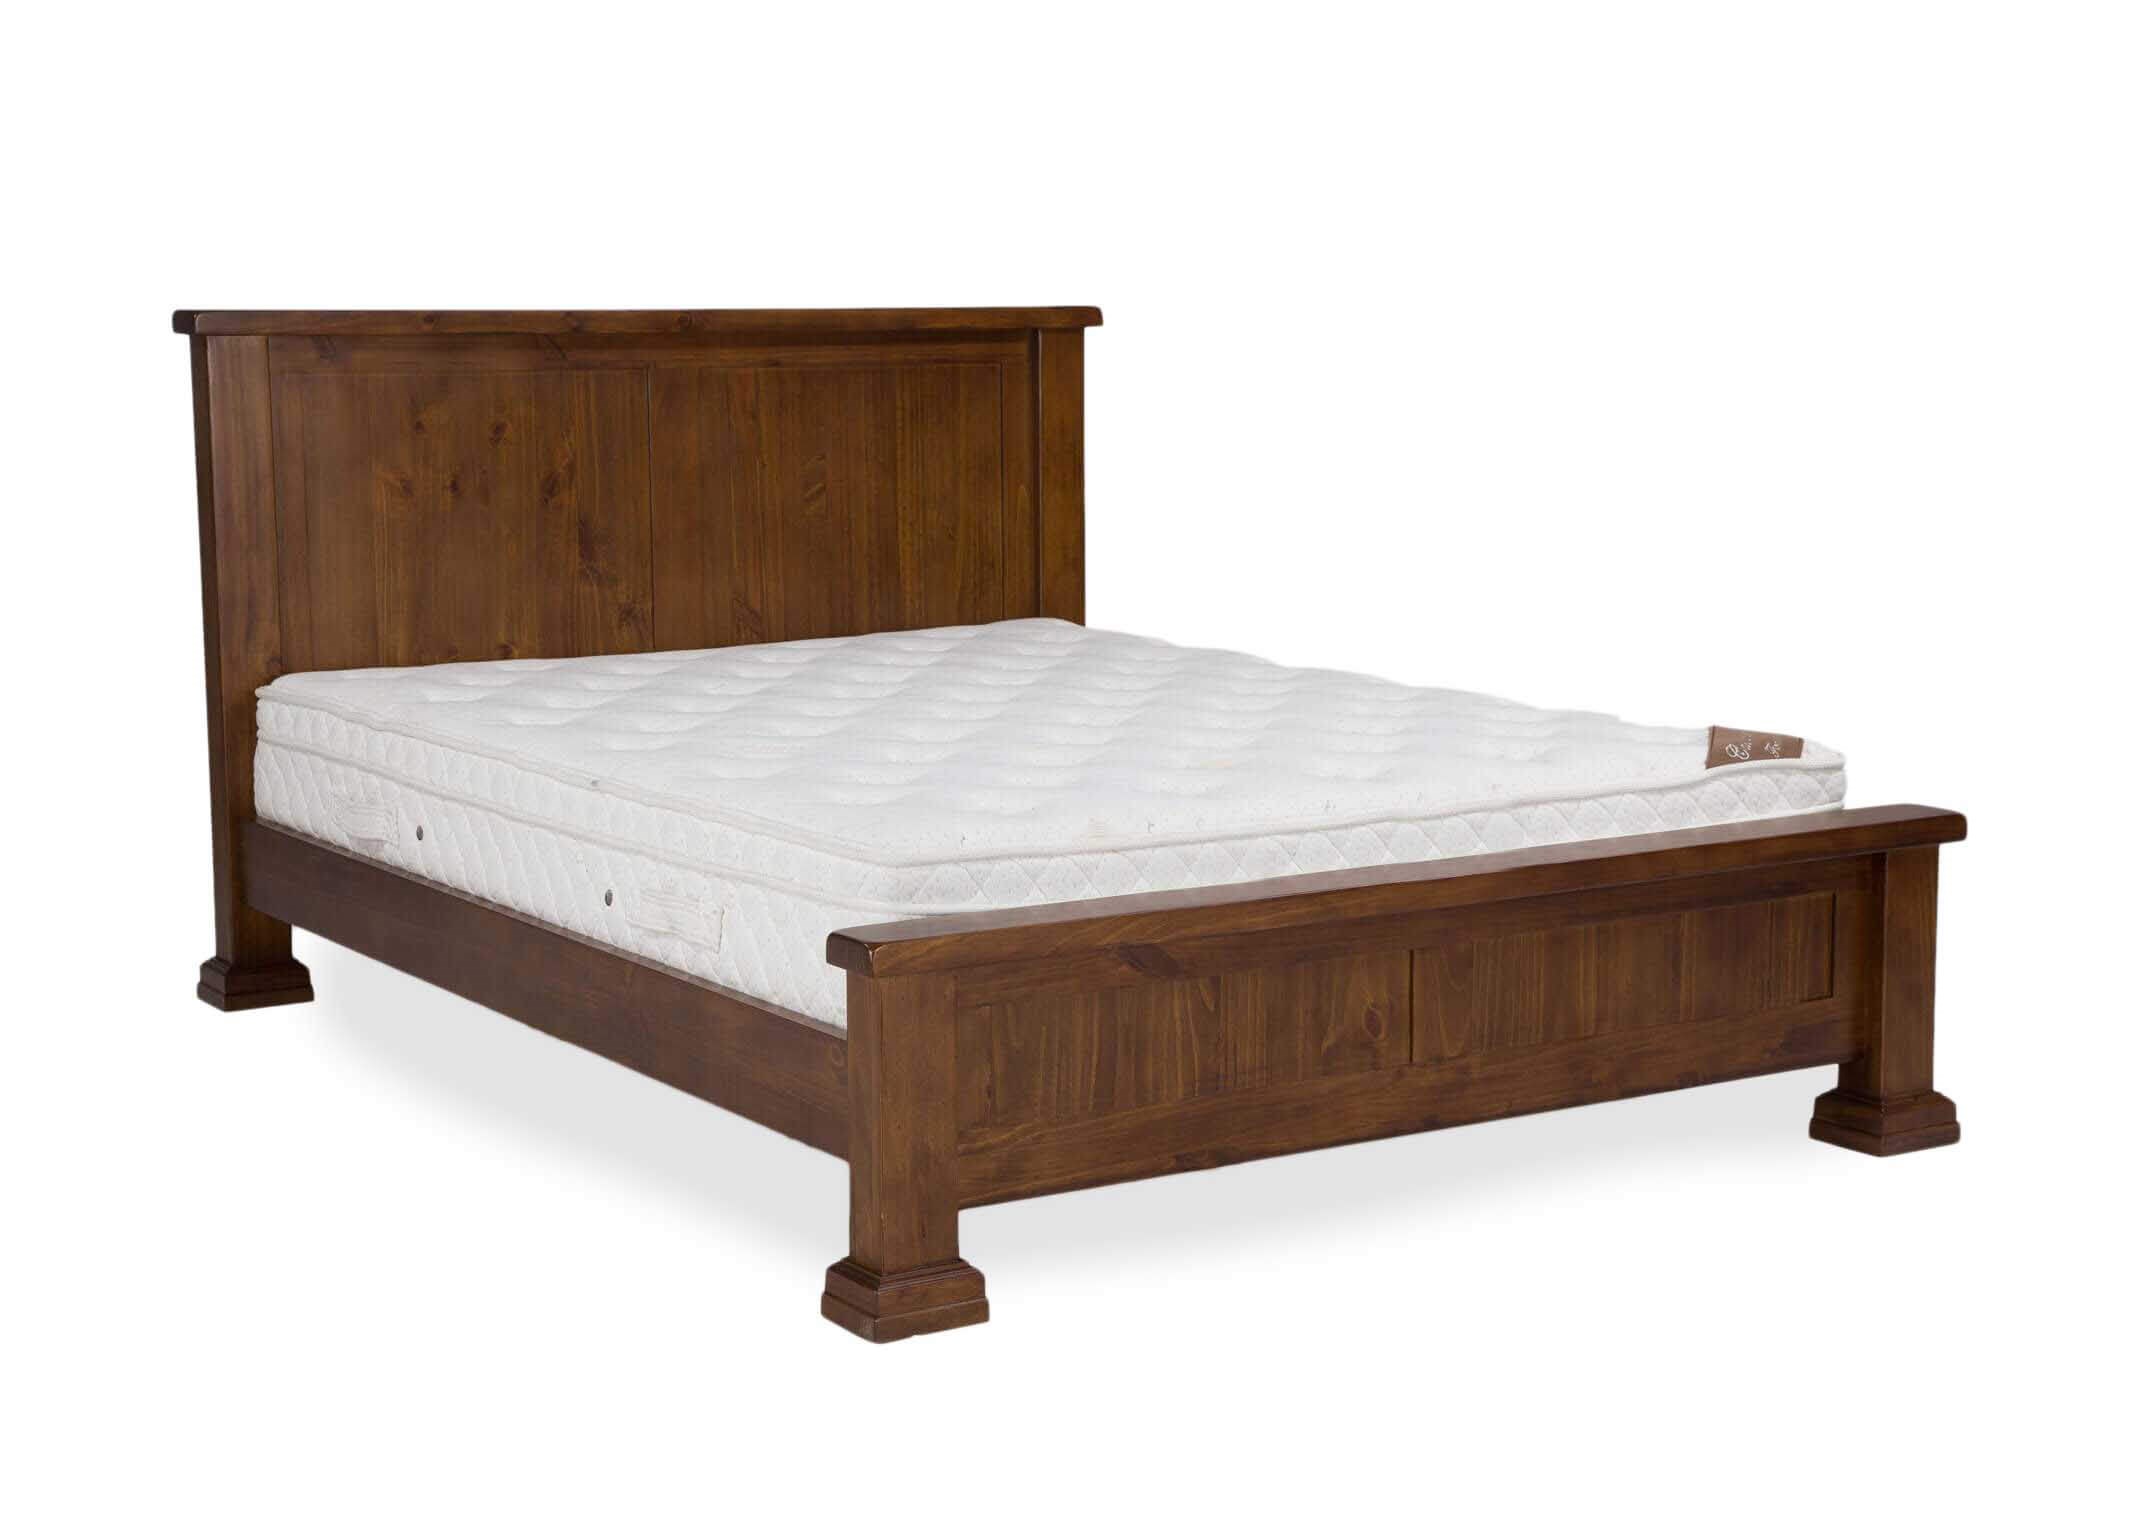 Solid Dark Gloss Wood Bed Frame, Real Wood Bed Frame King